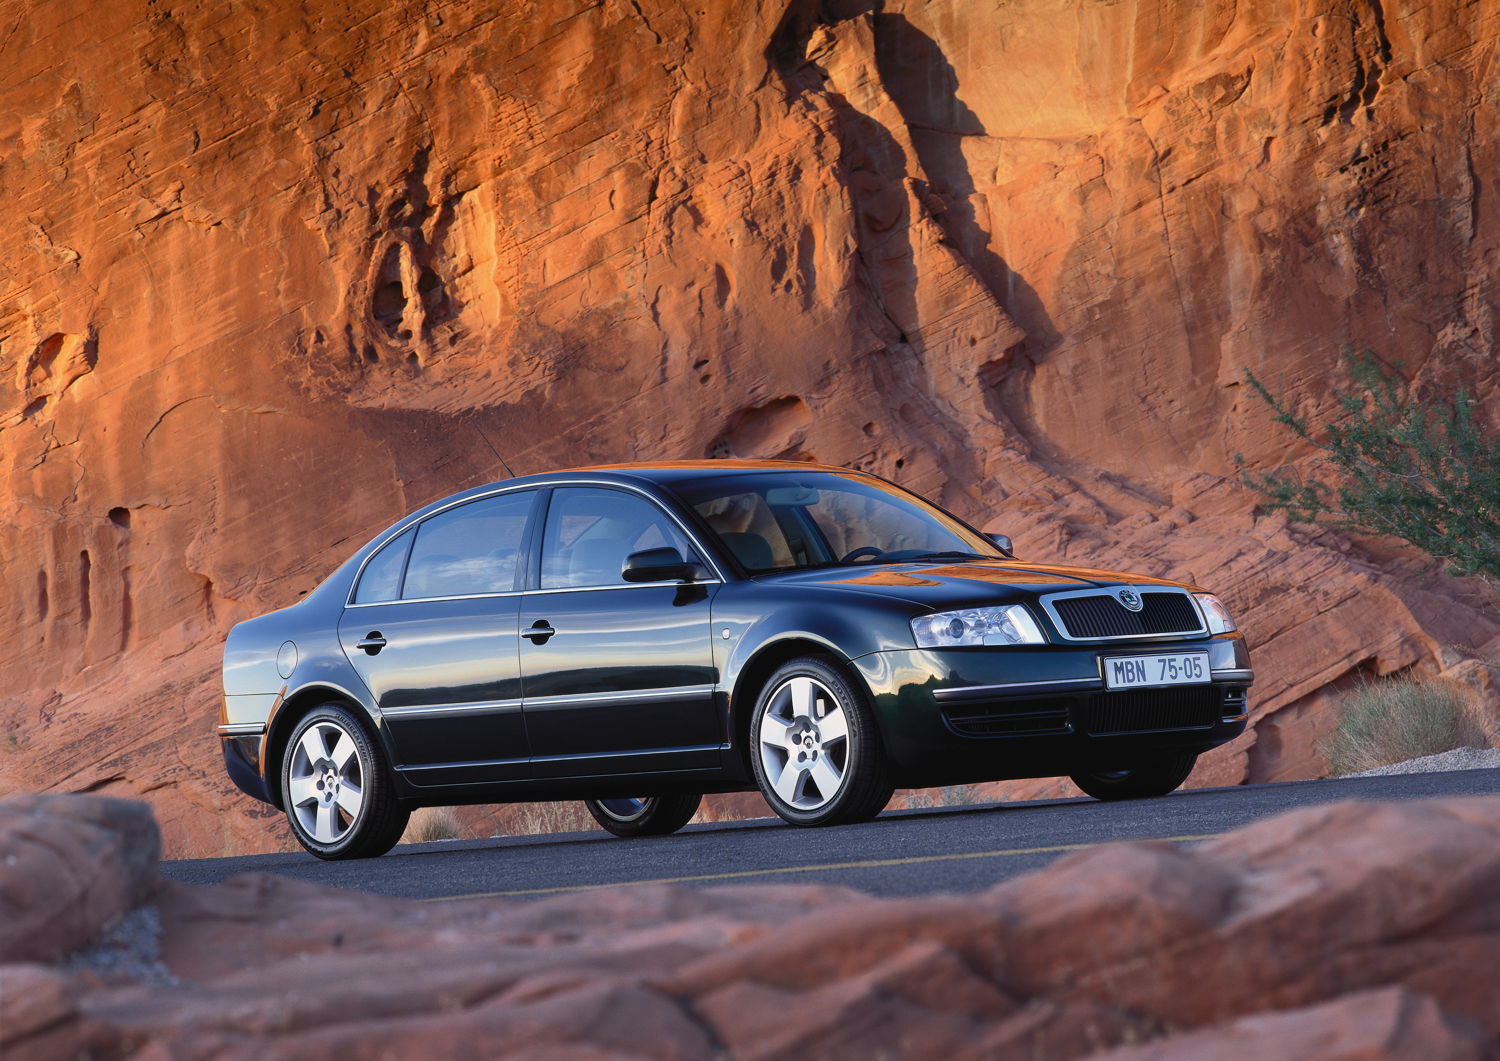 In 2001, the first generation of the modern ŠKODA SUPERB rolled off the production line: a mid-size saloon with a generous amount of space, especially in the back.